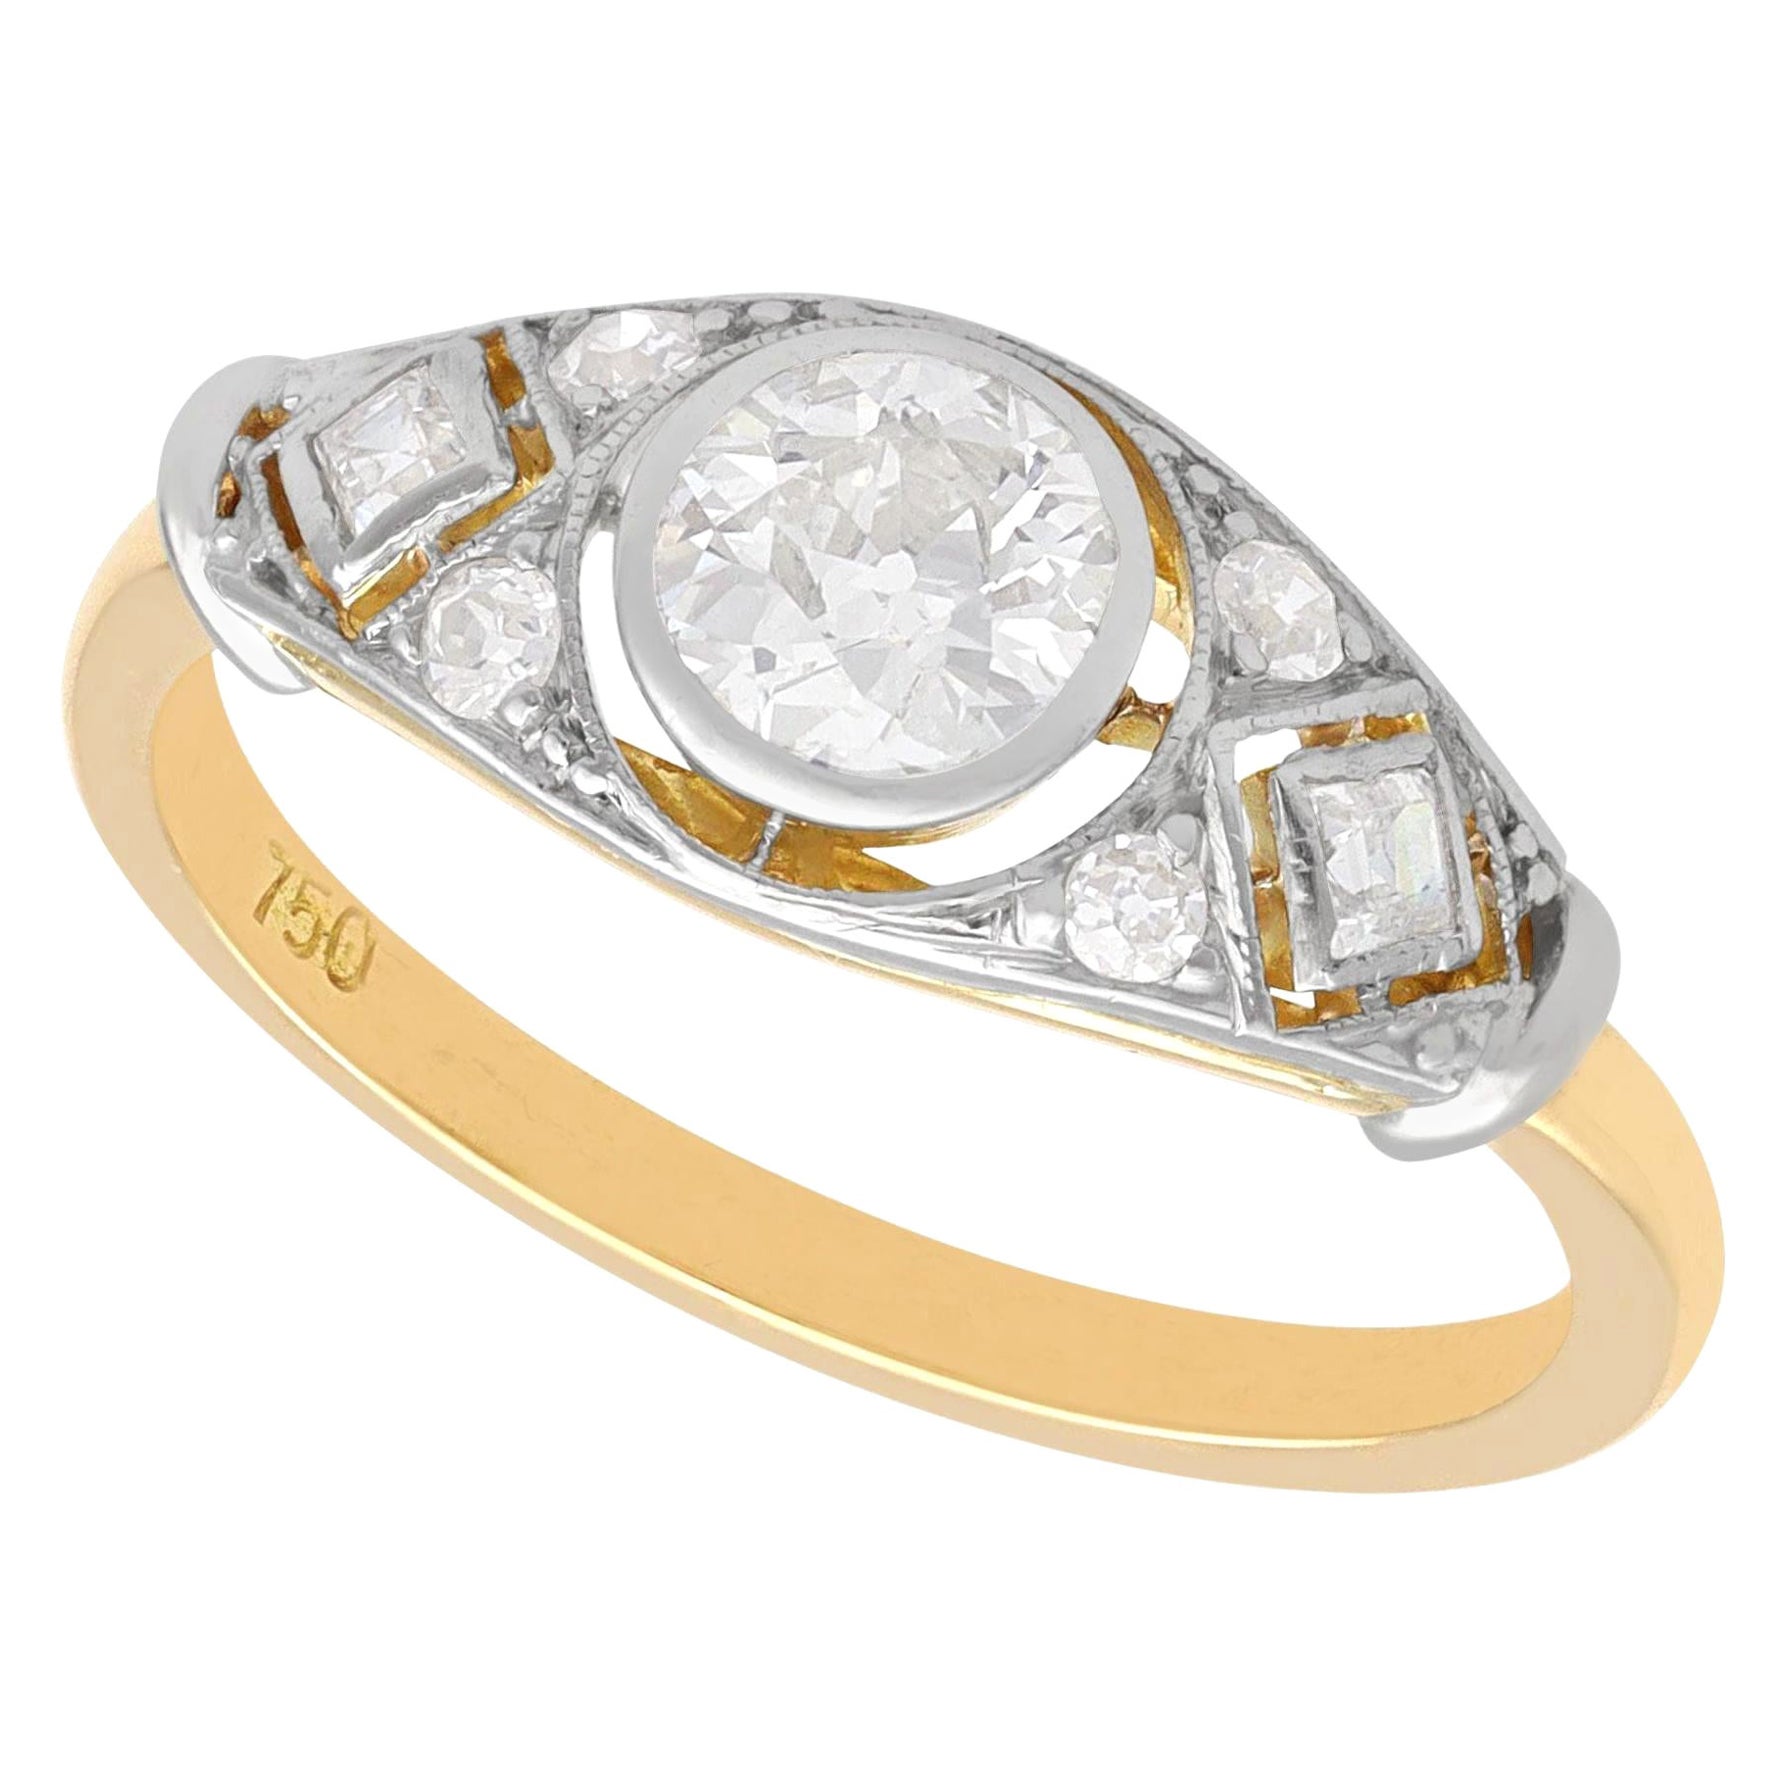 Antique 0.83 Carat Diamond and 18k Yellow Gold Solitaire Ring, Circa 1920s For Sale